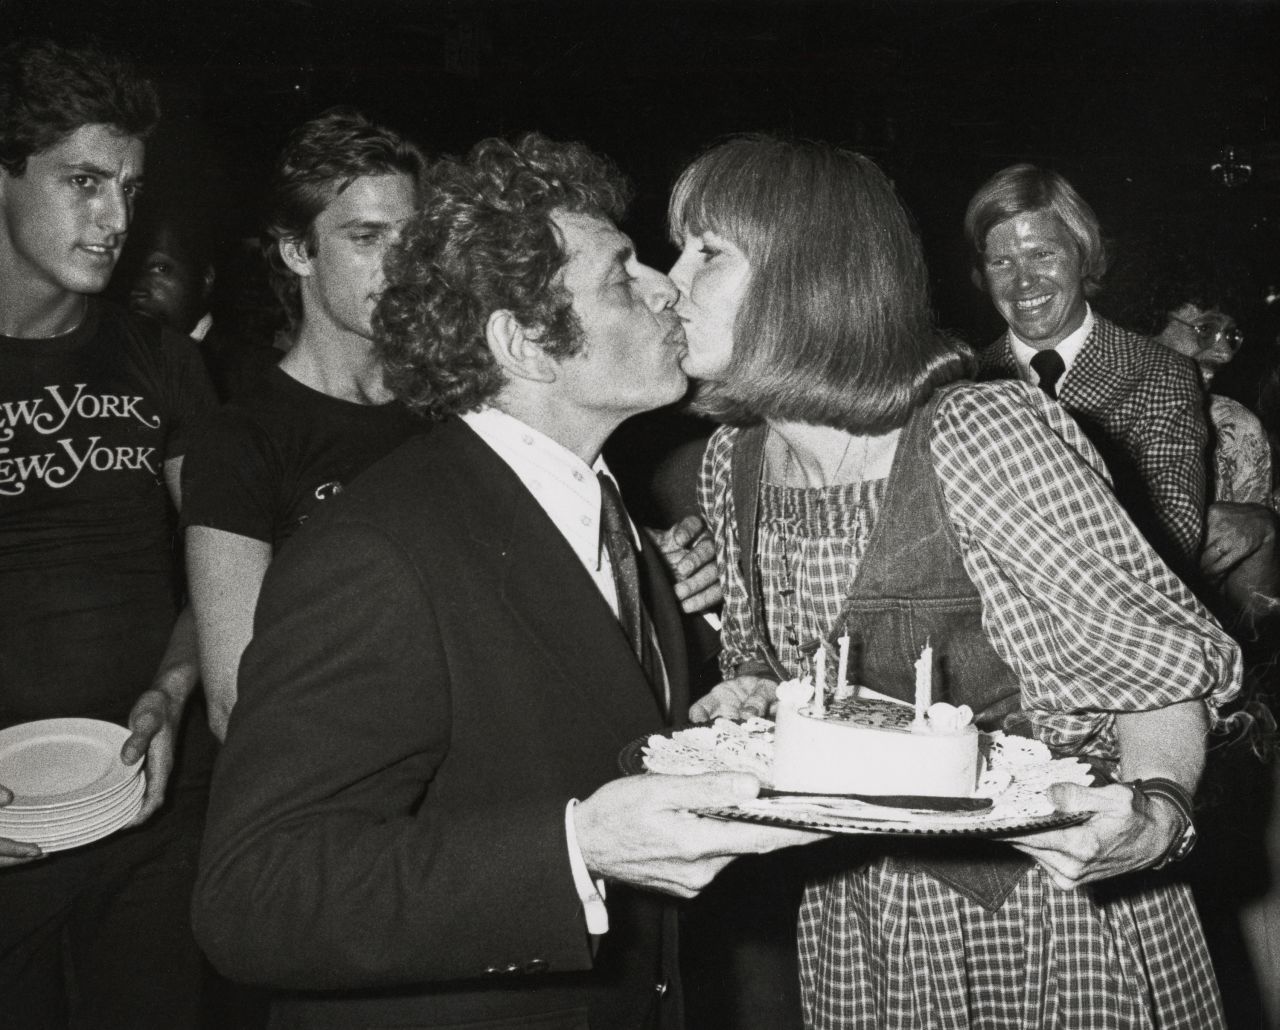 Stiller and Meara share a kiss in 1978. "Our marriage has lasted because we have the same feelings of insecurity about being an actor," <a href="https://www.nydailynews.com/entertainment/gossip/ben-stiller-mom-actress-anne-meara-dies-85-article-1.2234056" target="_blank" target="_blank">he told the New York Daily News in 2012.</a> "We needed stability."